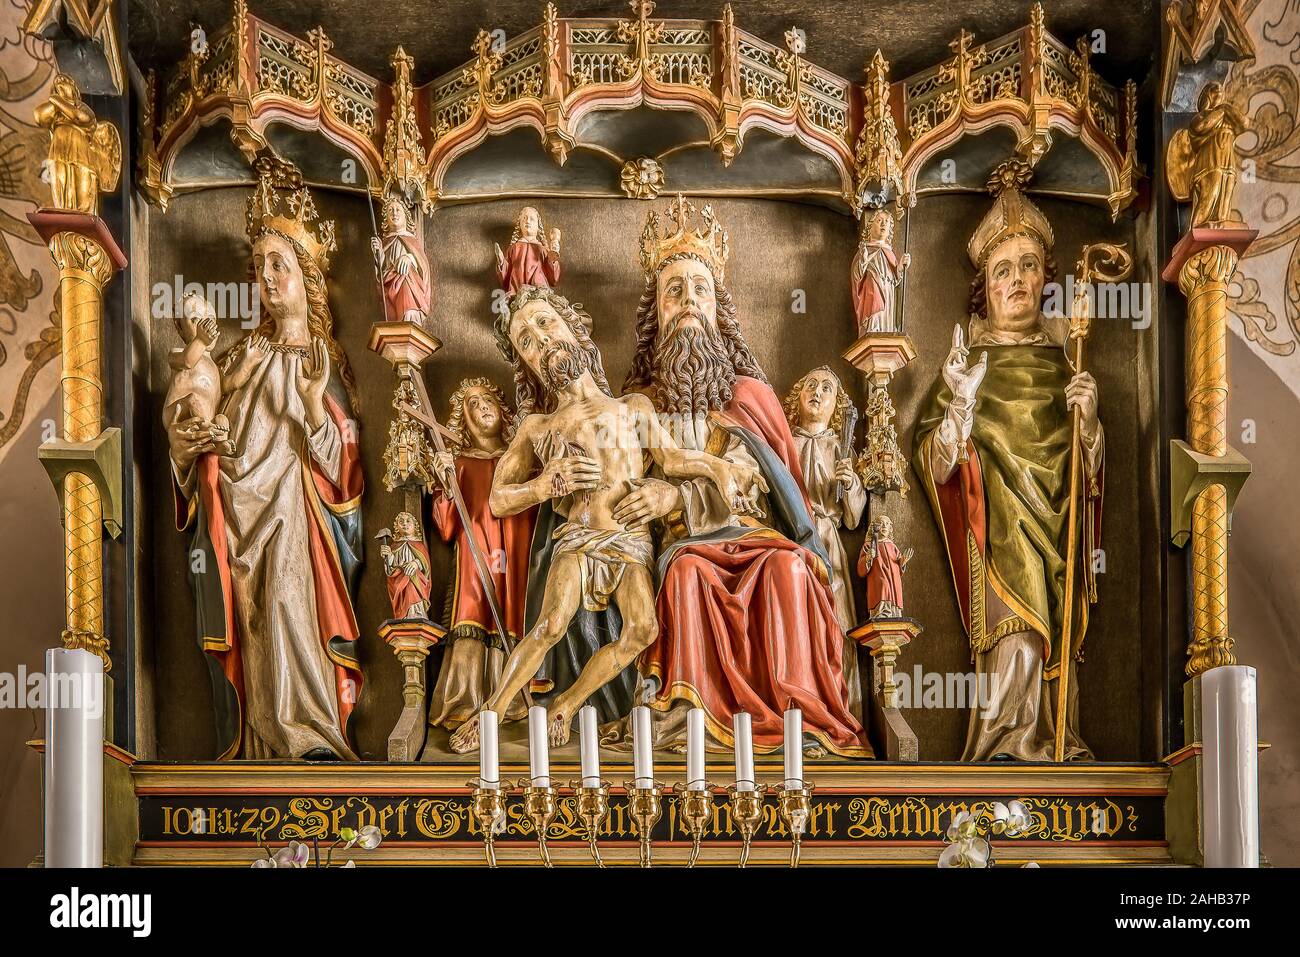 Gilded reredos from 1490 with sculptures of God the Father, Jesus and Virgin Mary in Smidstrup church, Denmark, Mars 27, 2019 Stock Photo